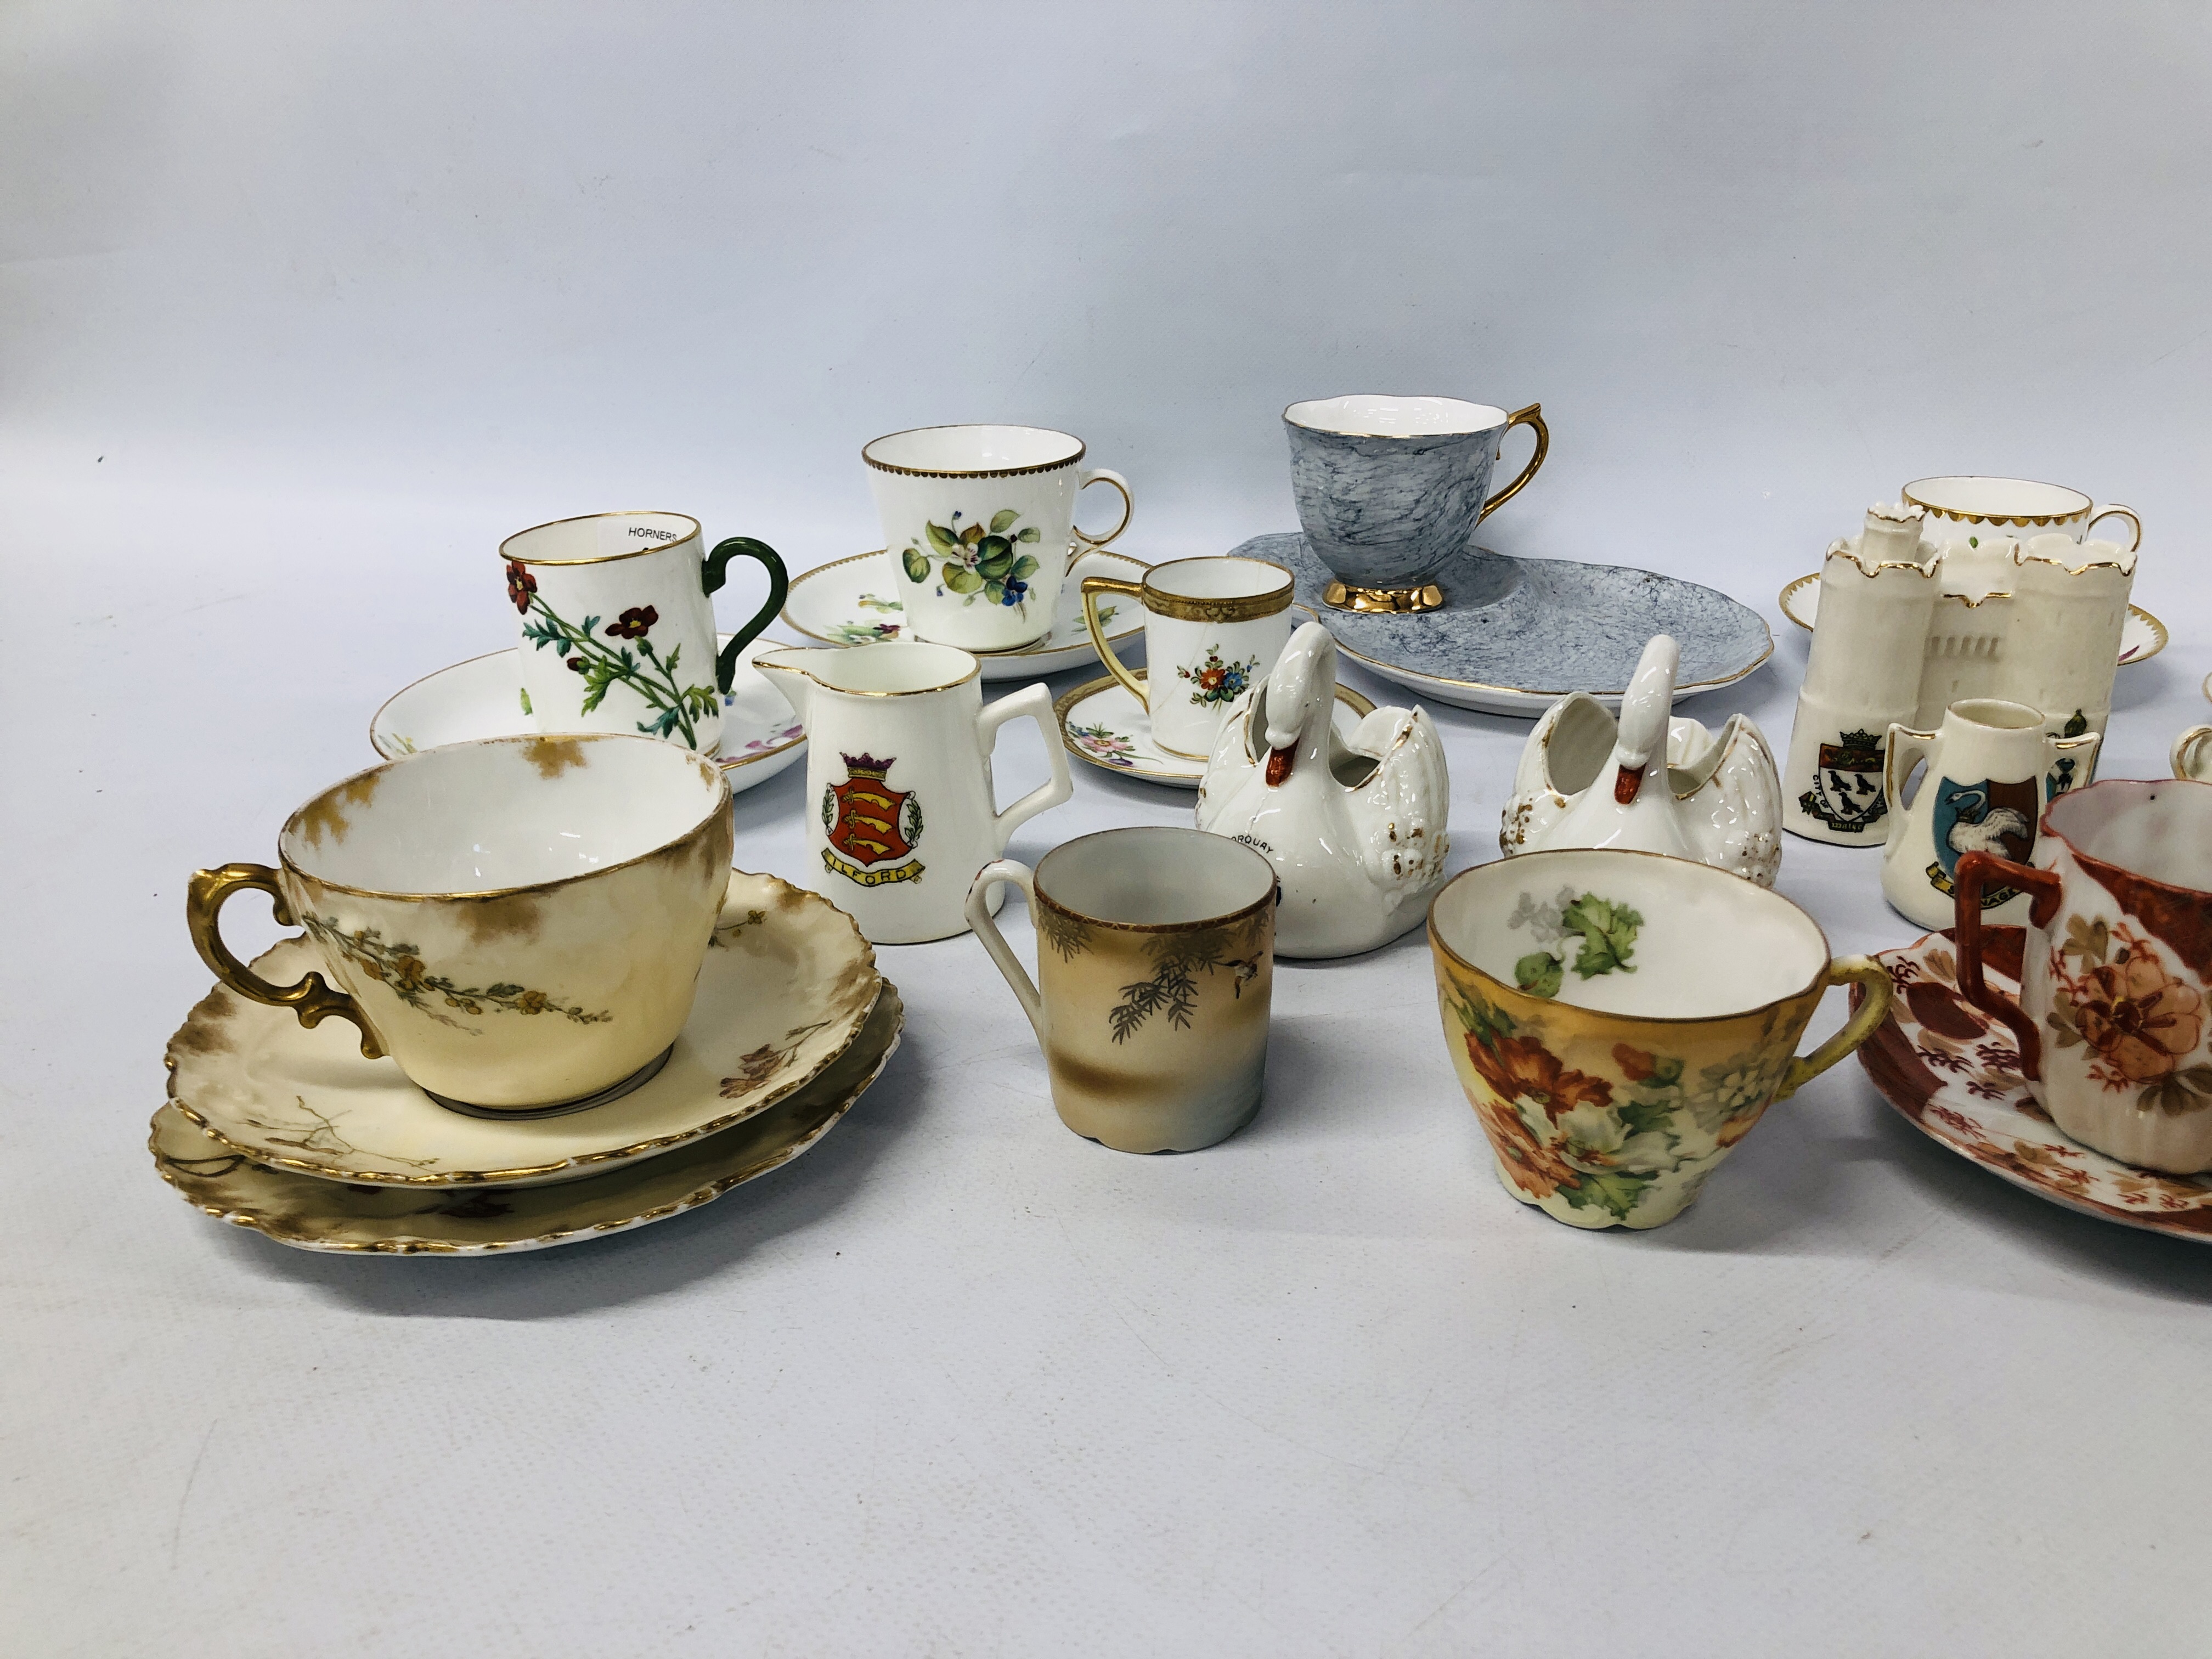 8 X VARIOUS CABINET CUPS AND SAUCERS TO INCLUDE ROYAL ALBERT "GOSSAMER" HAND PAINTED FLORAL DESIGN - Image 7 of 11